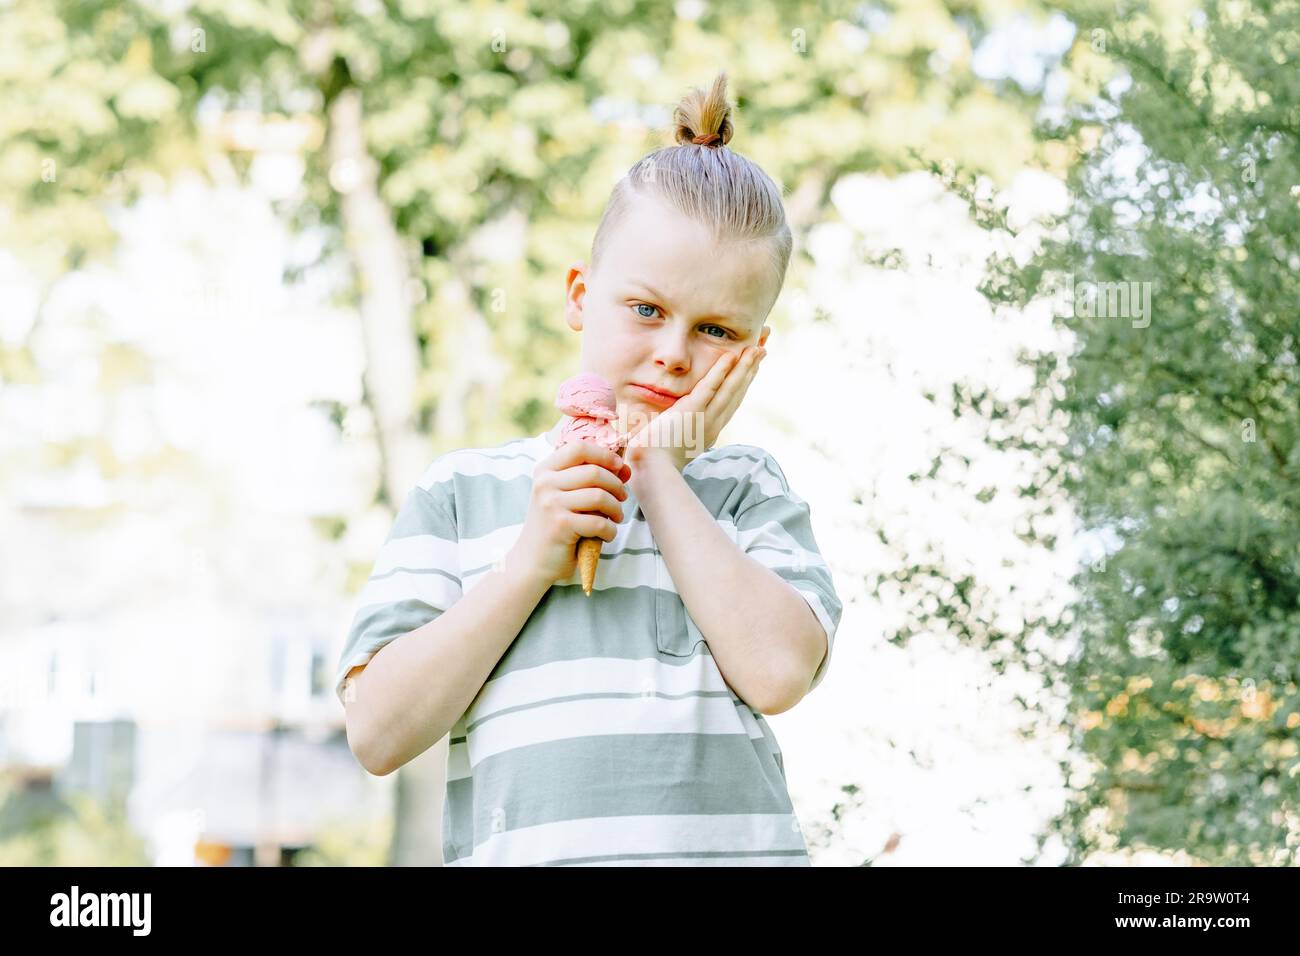 Sad child clutched his cheek with his hand and held an ice cream cone in his other hand. Problems sensitivity of teeth in a child or tooth decay. Stock Photo